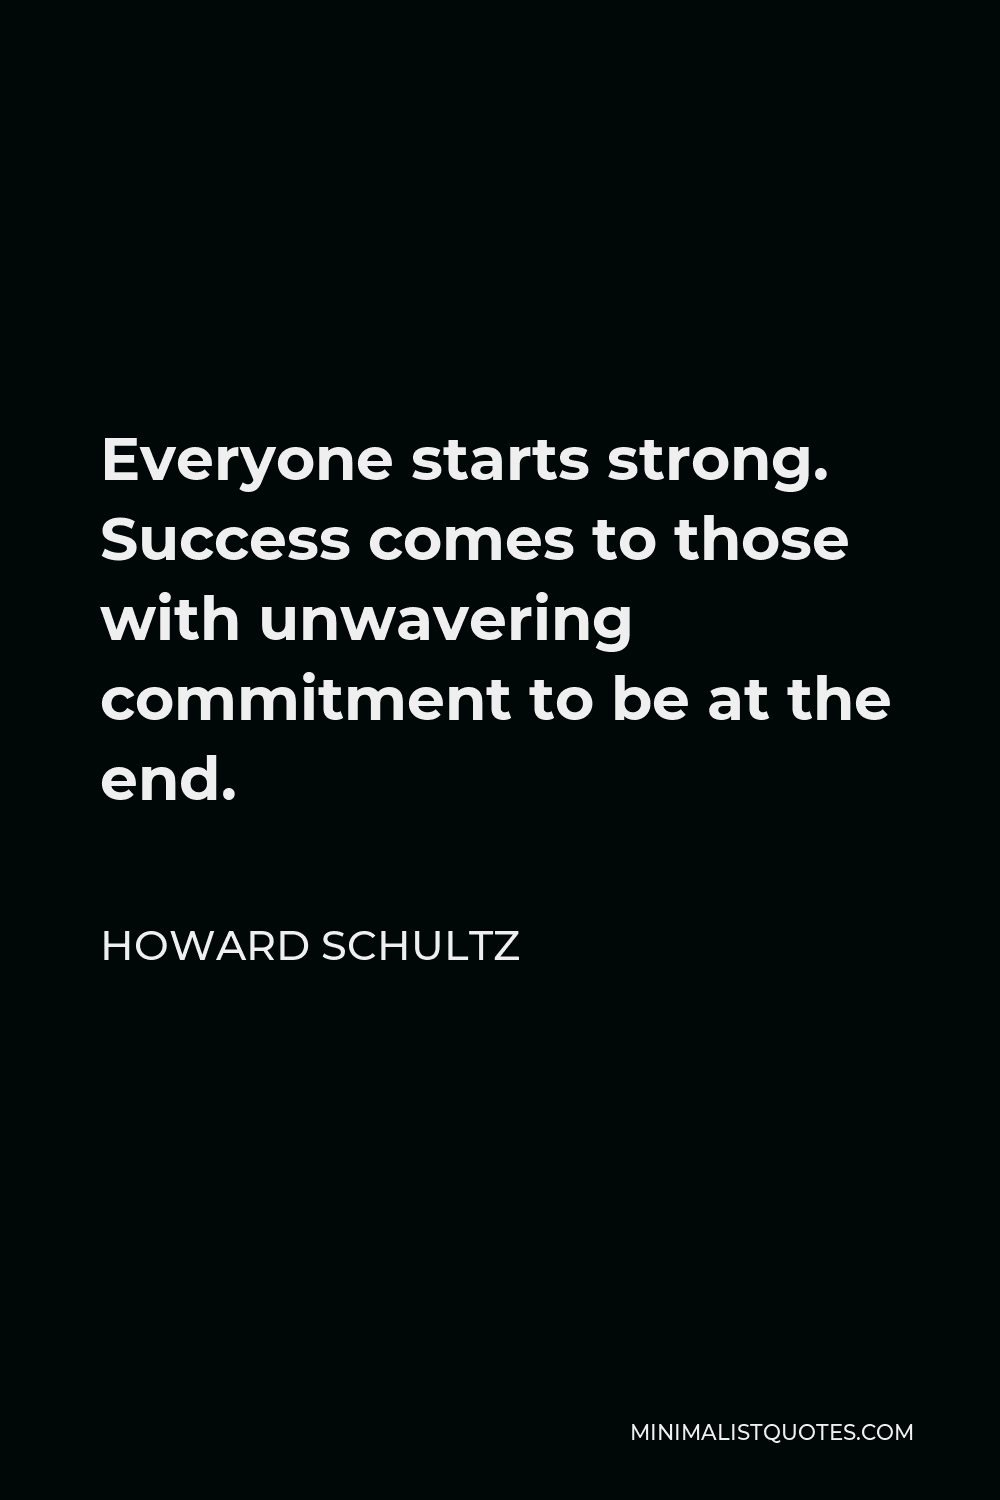 Howard Schultz Quote - Everyone starts strong. Success comes to those with unwavering commitment to be at the end.